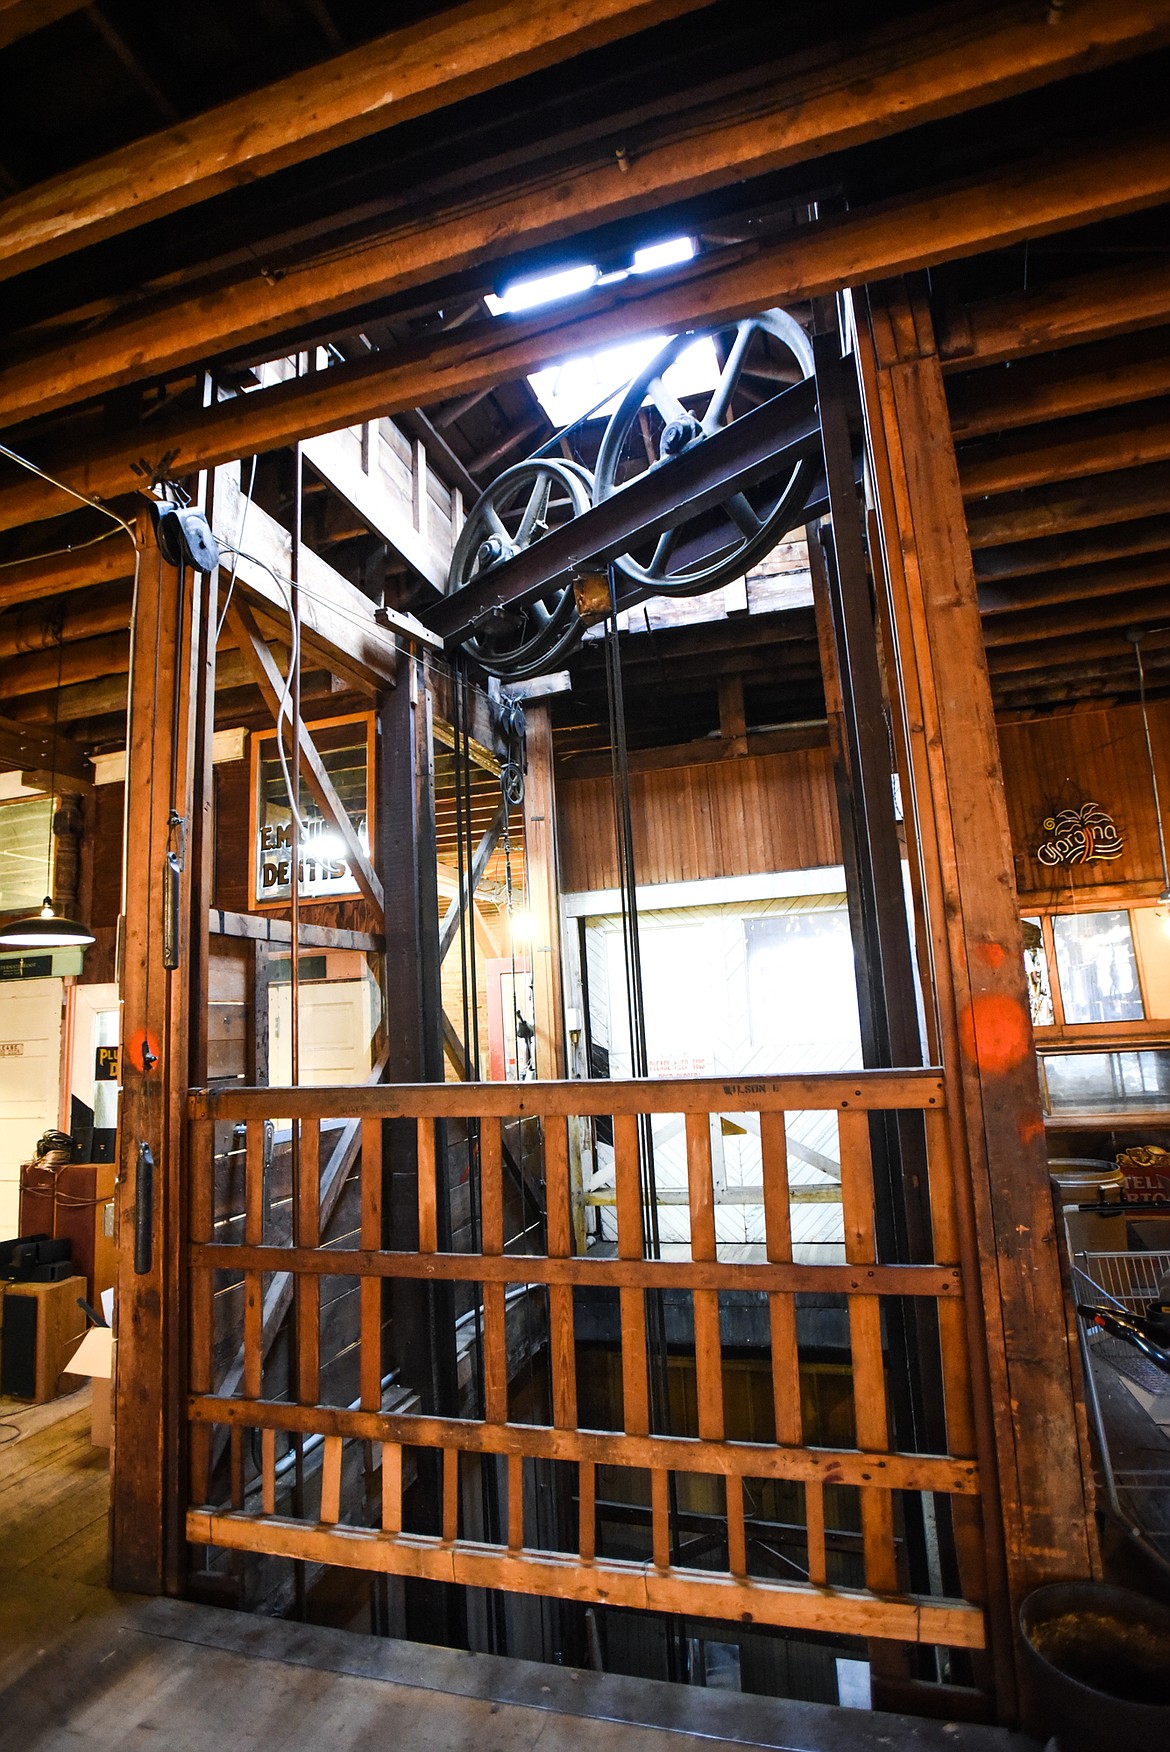 An Otis freight elevator built in 1903 inside what Bill Goodman refers to as the "warehouse" at the KM Building in Kalispell on Friday, Dec. 4. (Casey Kreider/Daily Inter Lake)